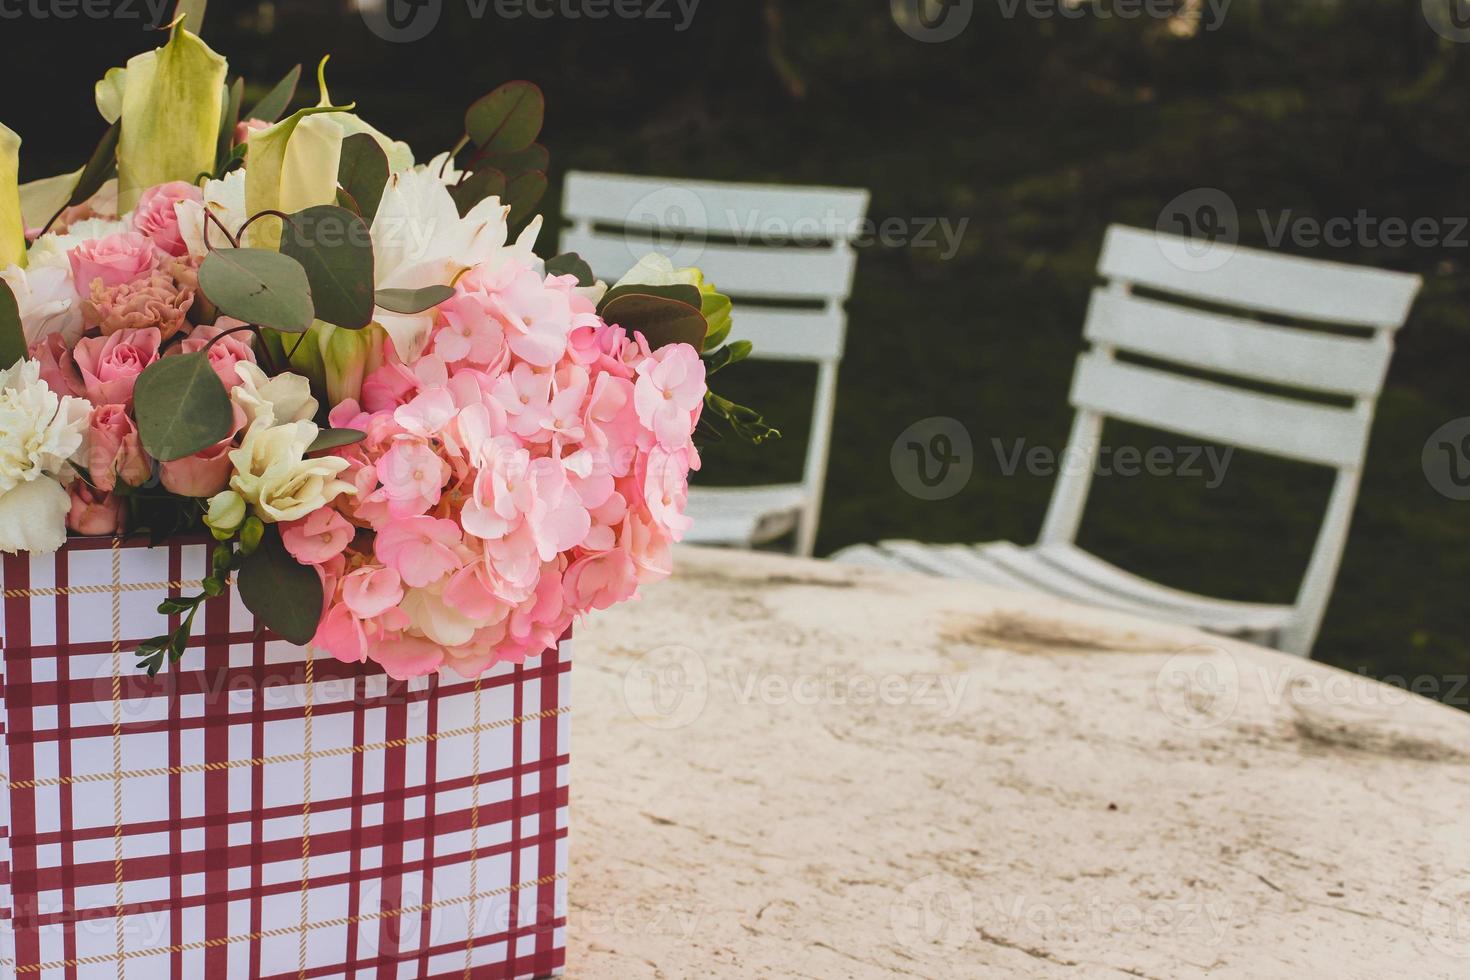 Flowers in gift box outside on table photo